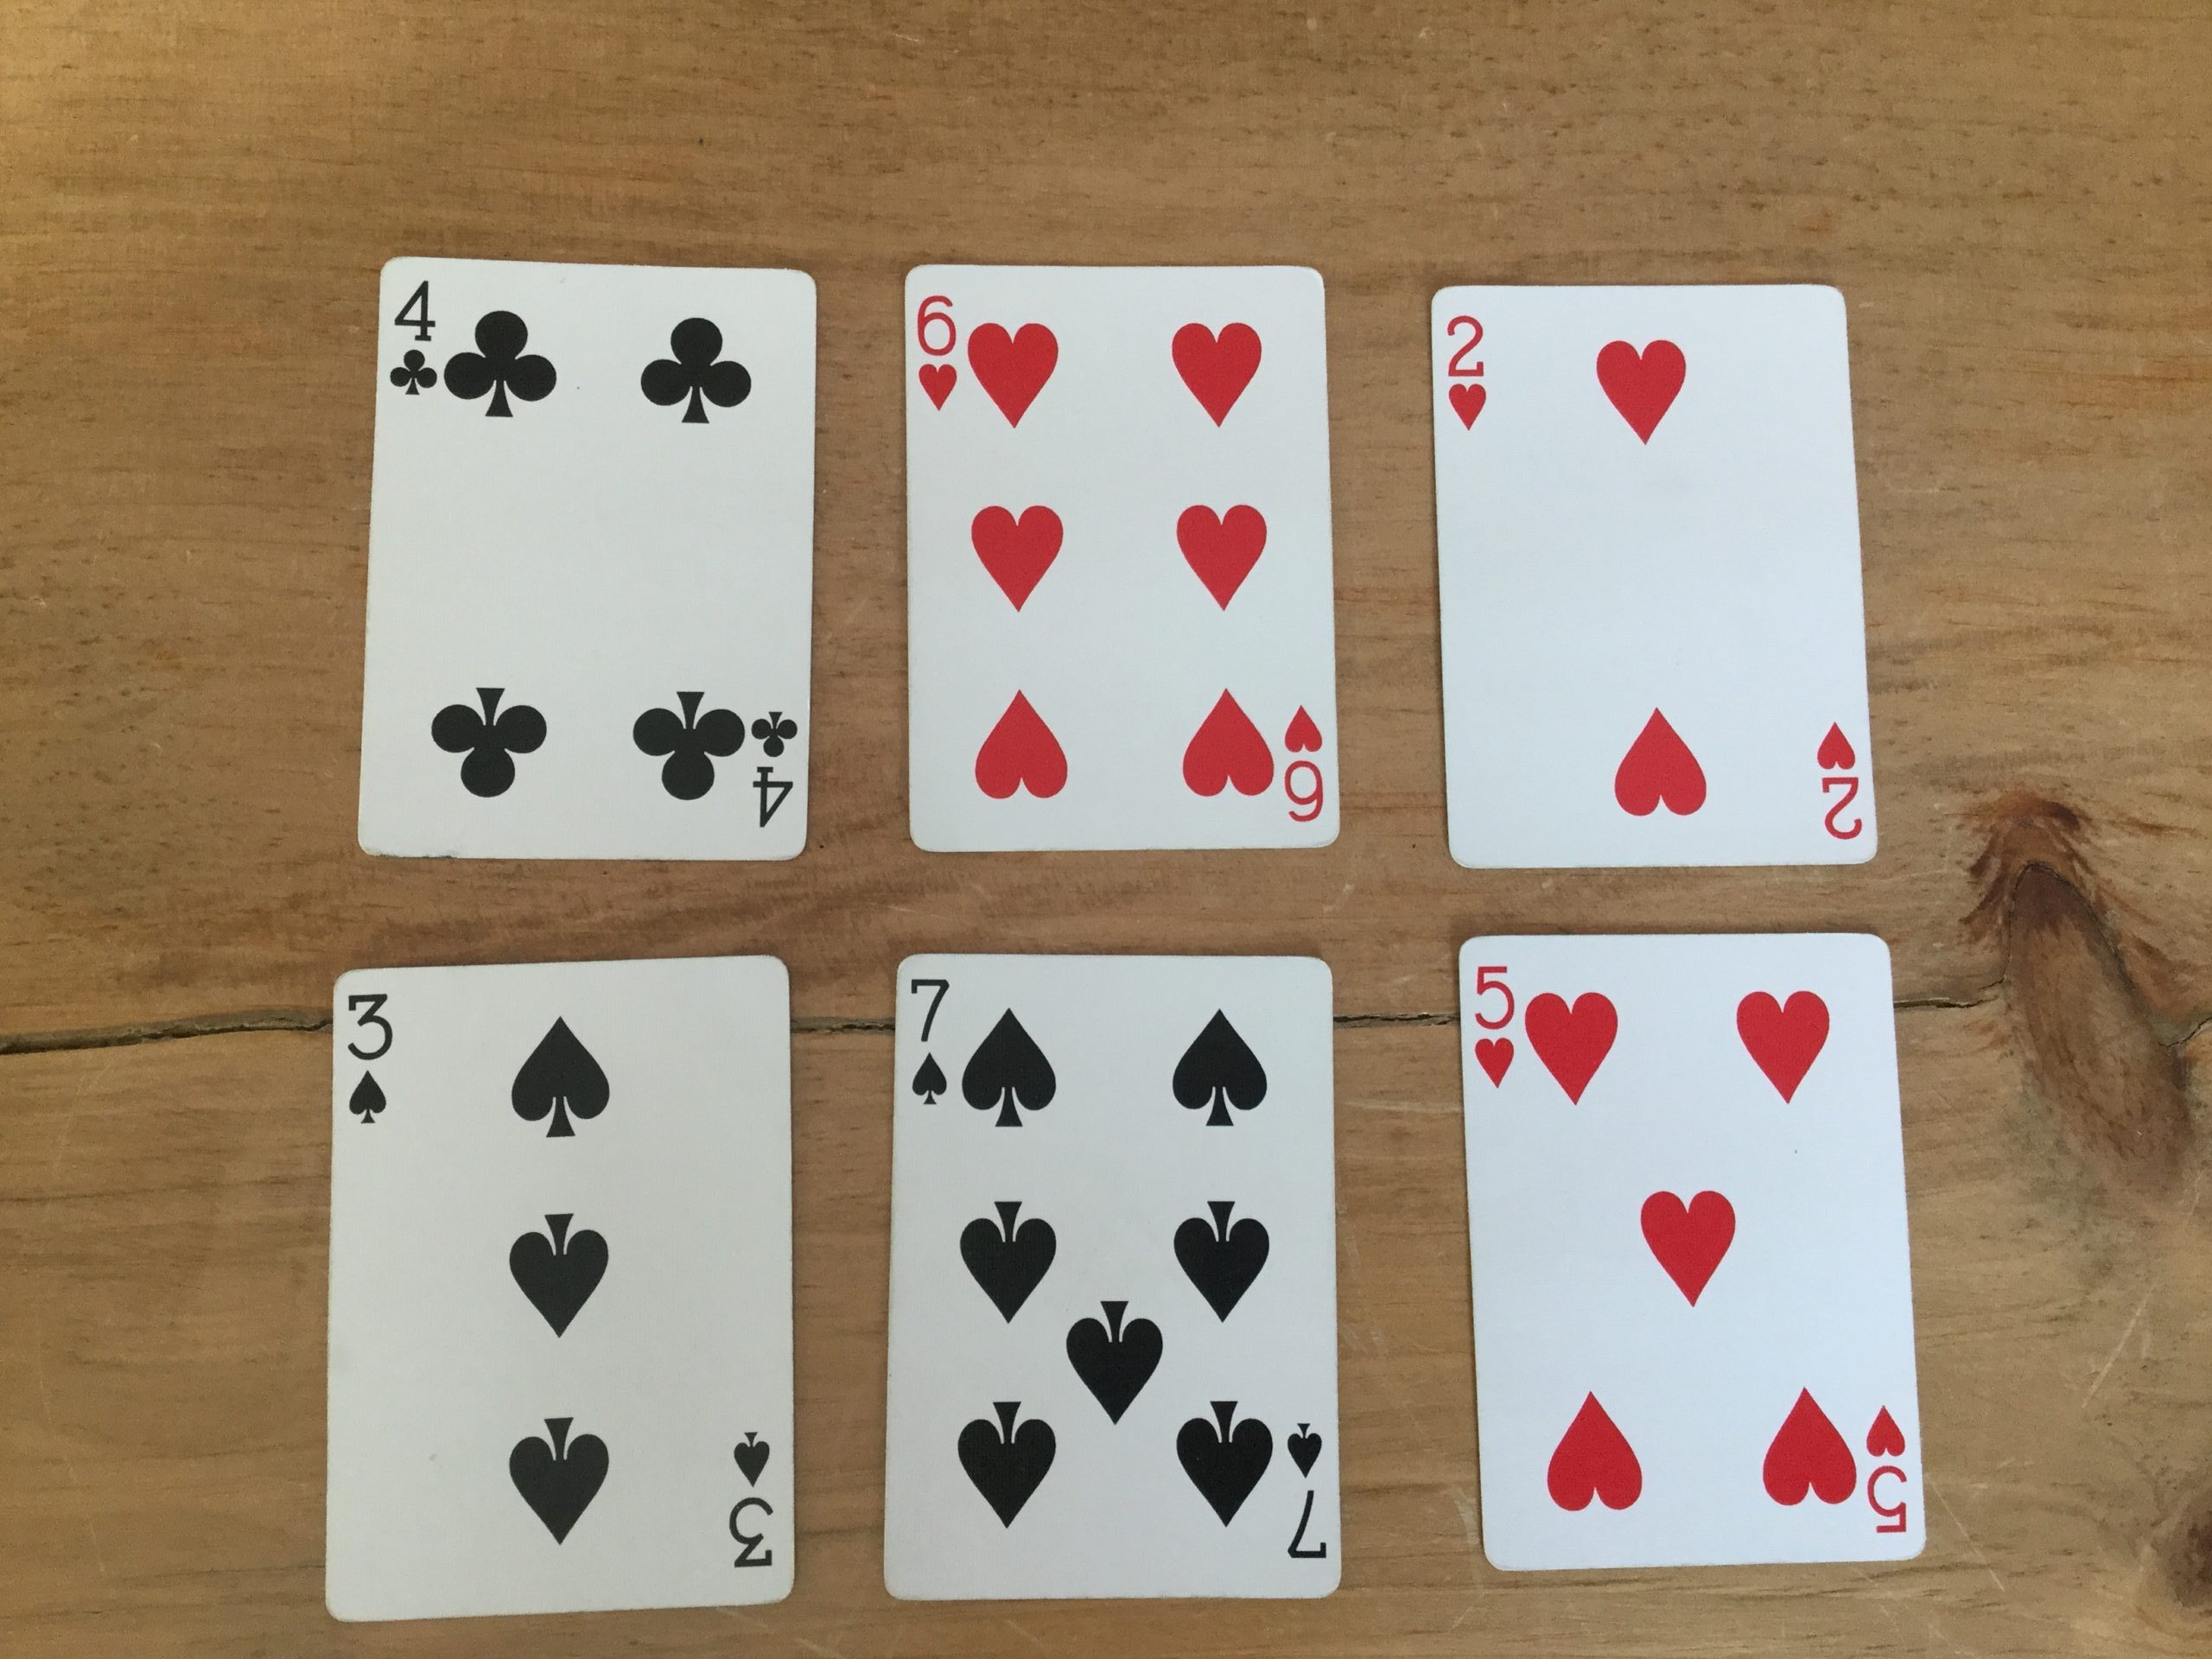 Adding and subtracting within 20 using a deck of cards